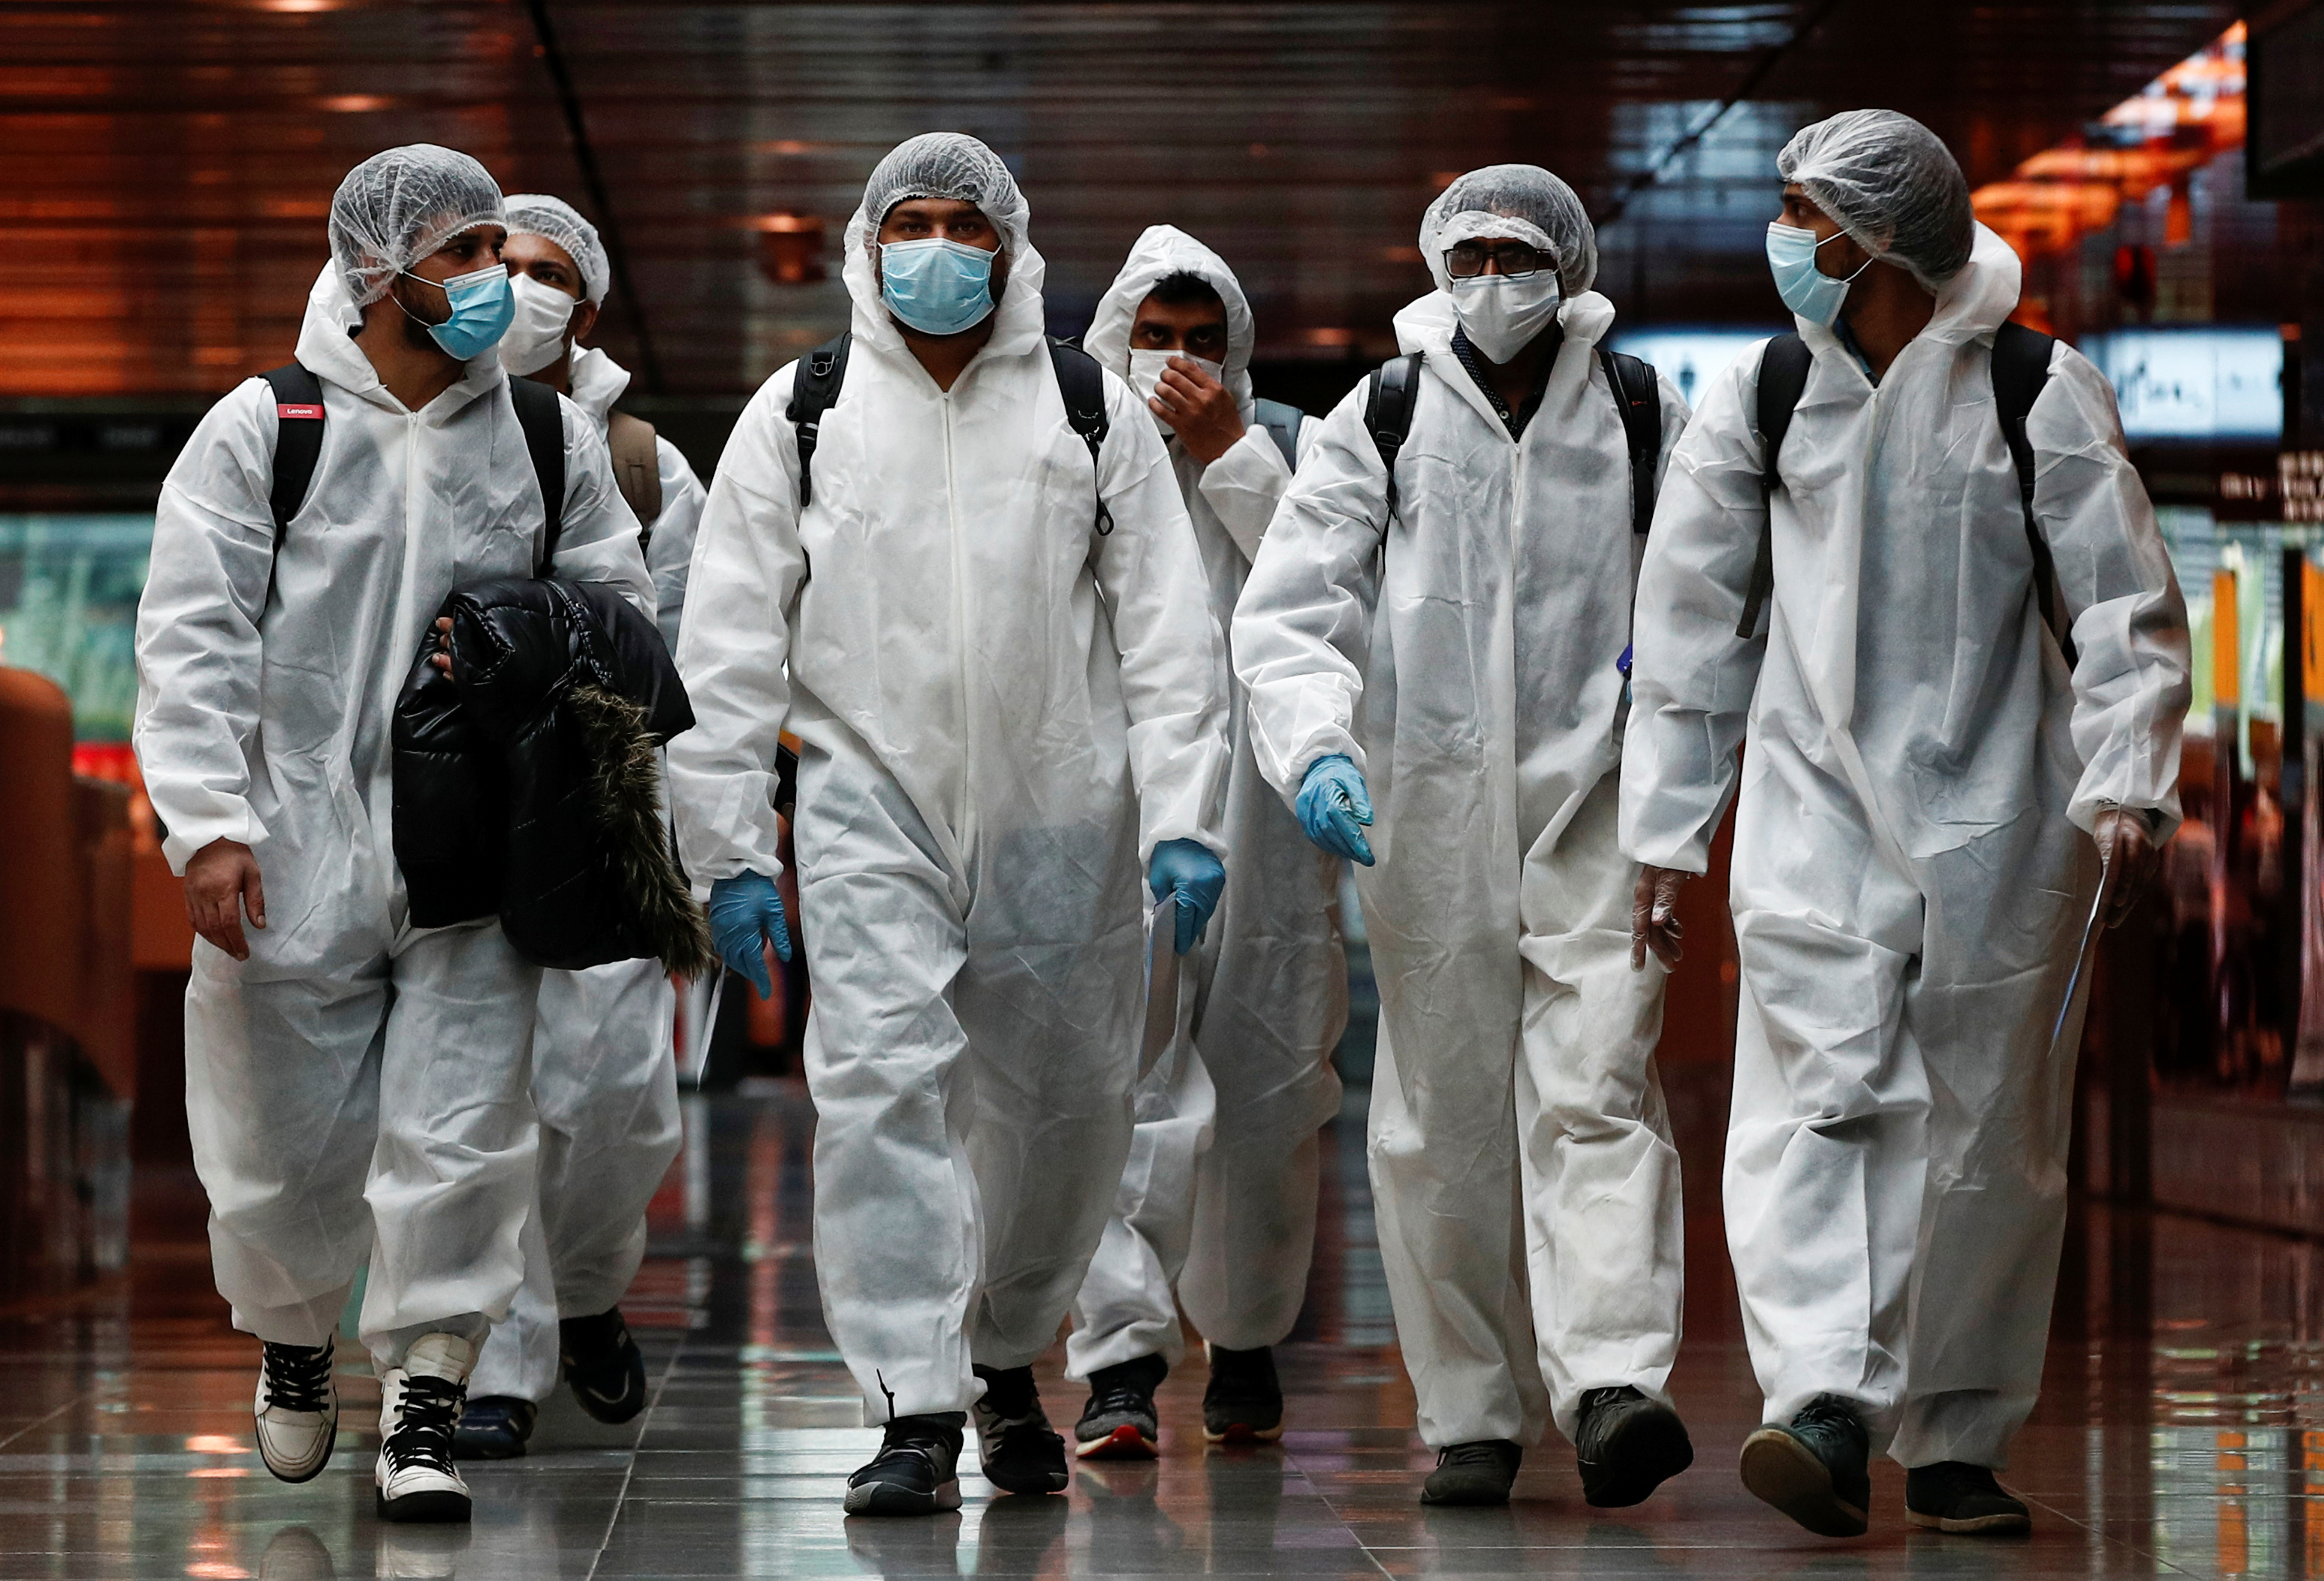 Seafarers who have spent the past months working onboard vessels arrive at the Changi Airport to board their flight back home to India during a crew change amid the coronavirus disease (COVID-19) outbreak in Singapore June 12, 2020. REUTERS/Edgar Su